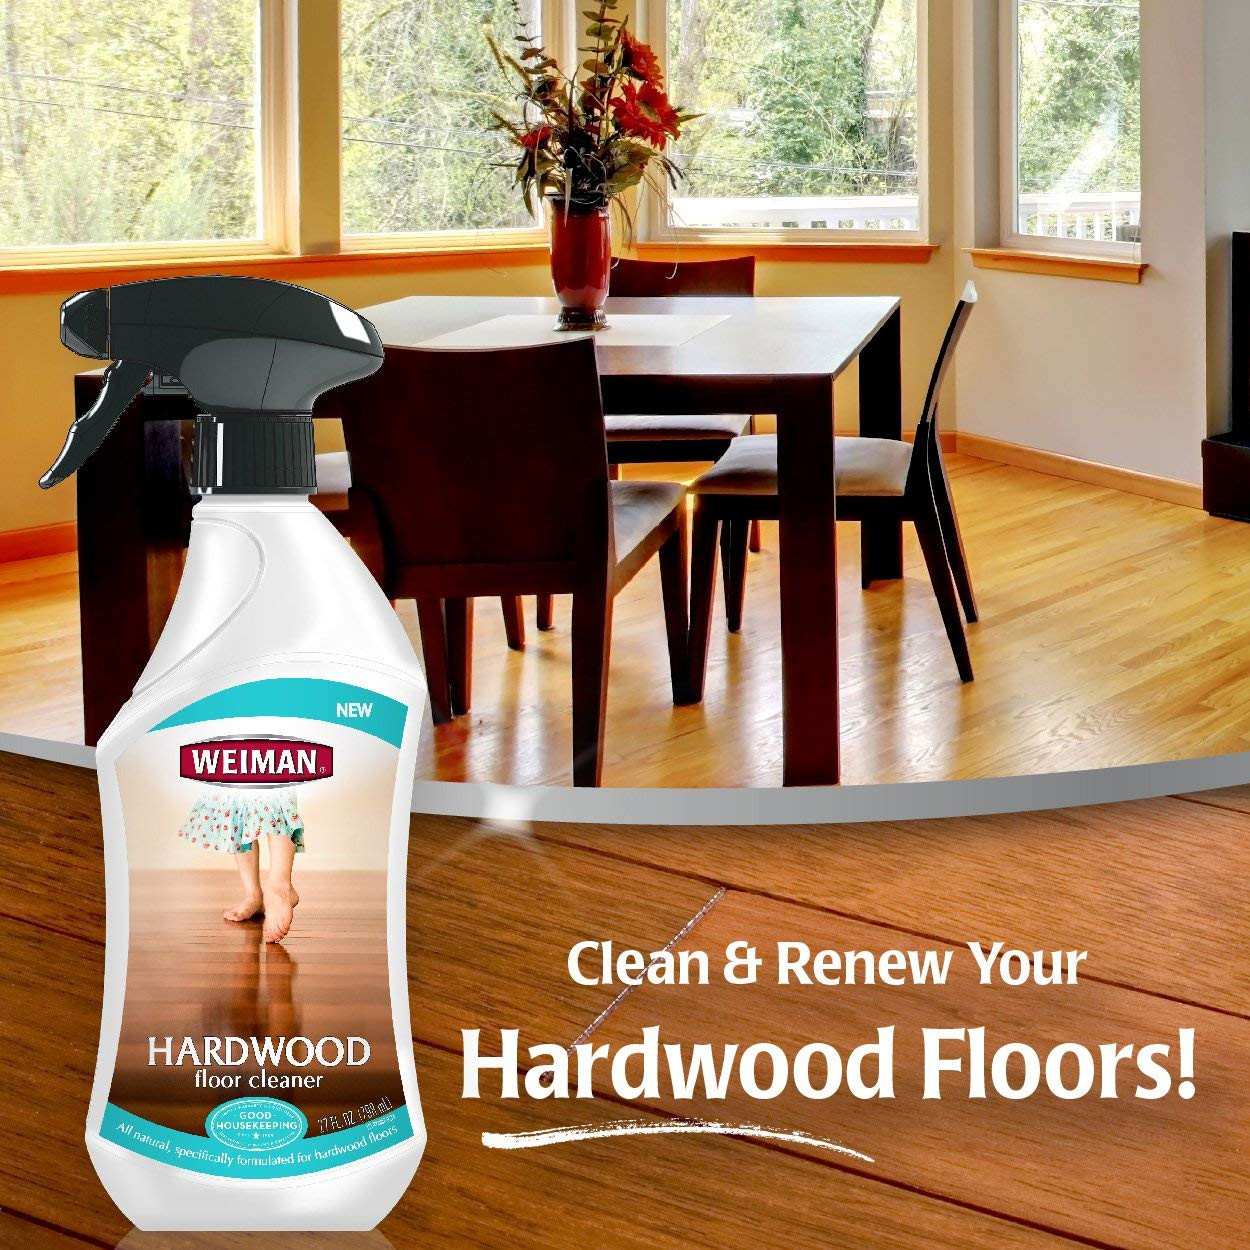 19 Recommended How to Refinish Hardwood Floors Video 2024 free download how to refinish hardwood floors video of amazon com weiman hardwood floor cleaner surface safe no harsh regarding amazon com weiman hardwood floor cleaner surface safe no harsh scent safe fo